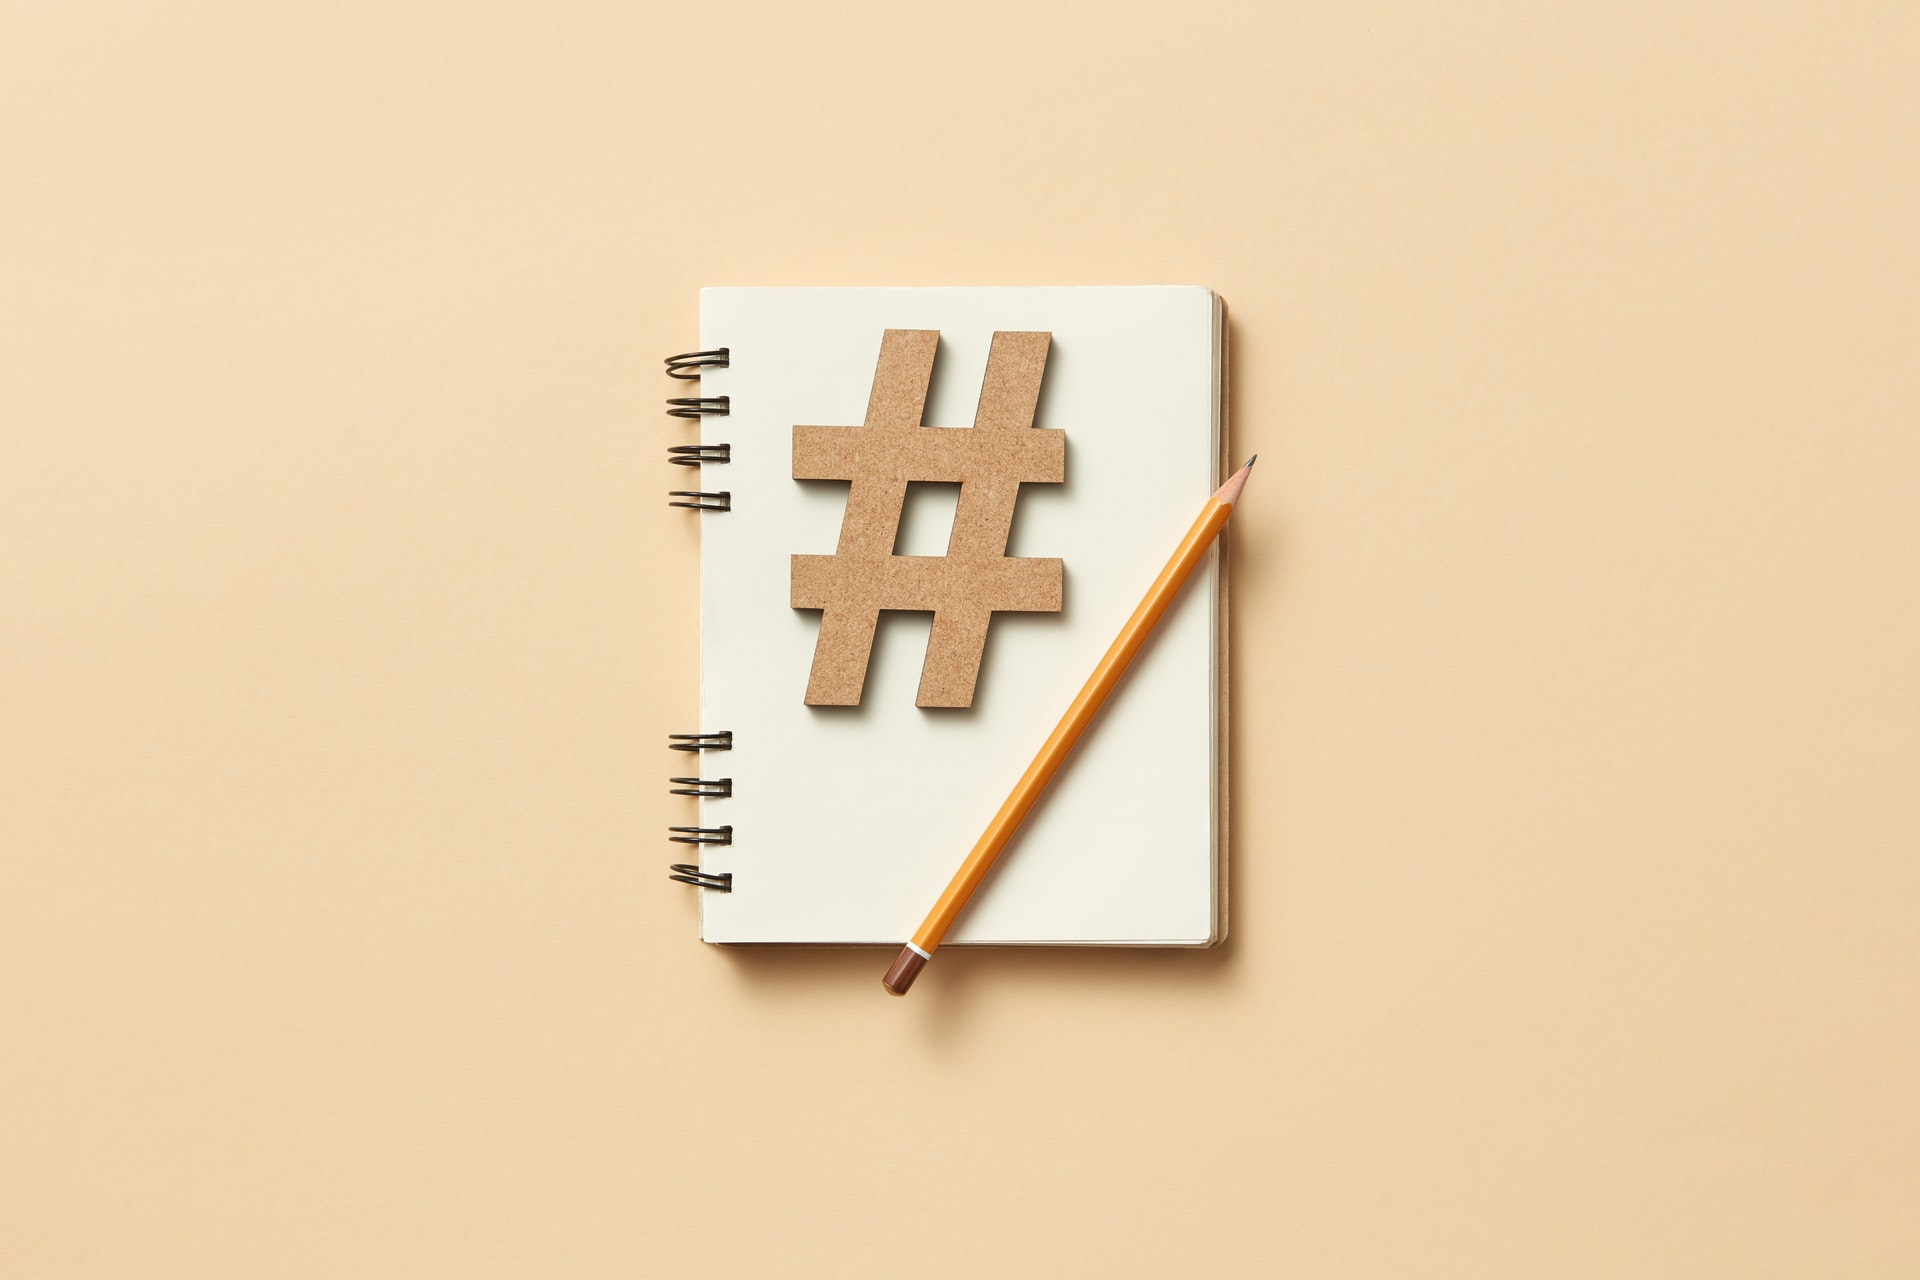 Image of hashtag on a notebook.